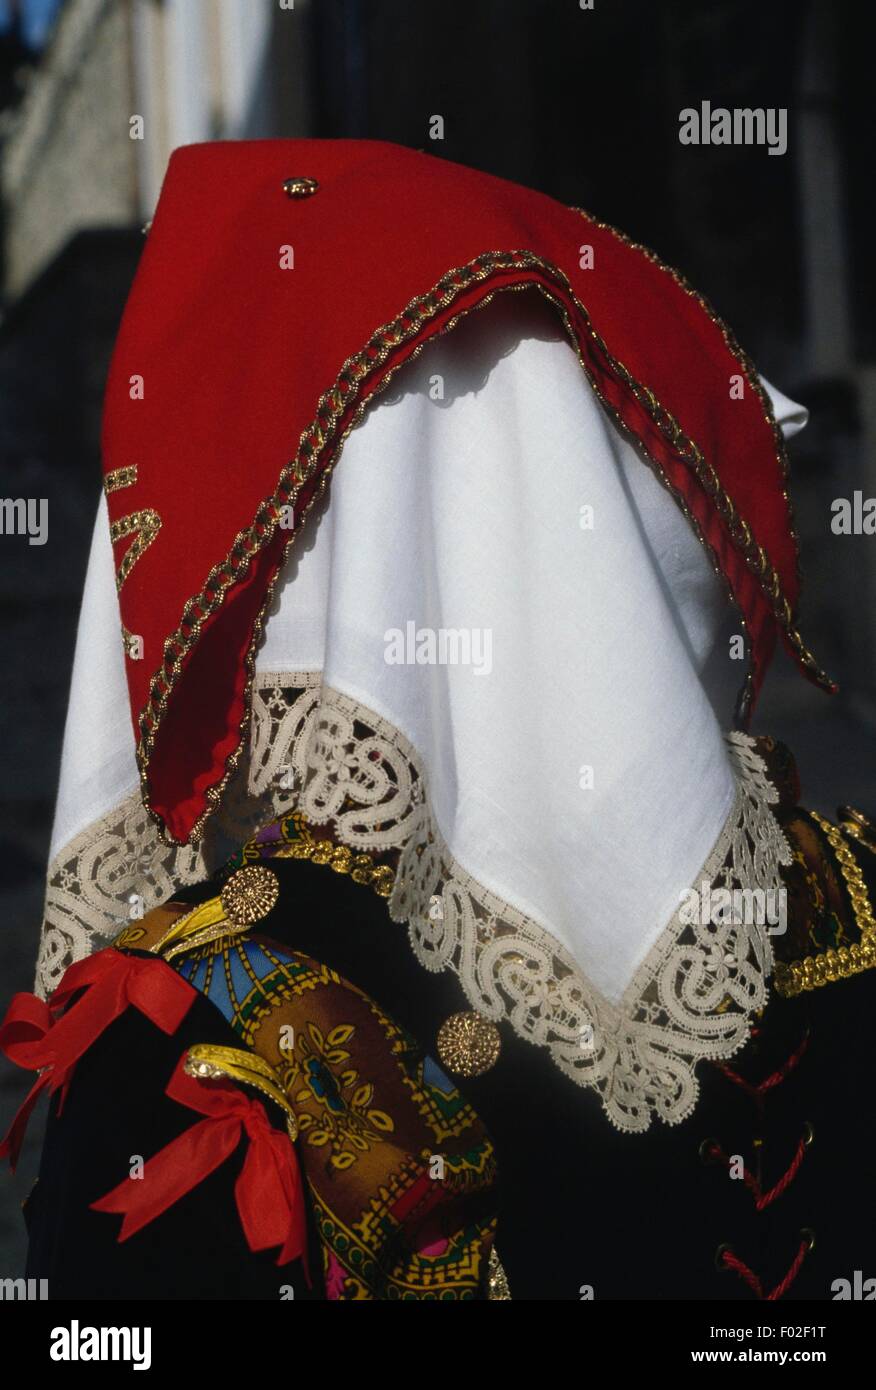 Detail of the large handkerchief used as traditional headpiece for women's costumes, Pescocostanzo, Abruzzo, Italy. Stock Photo